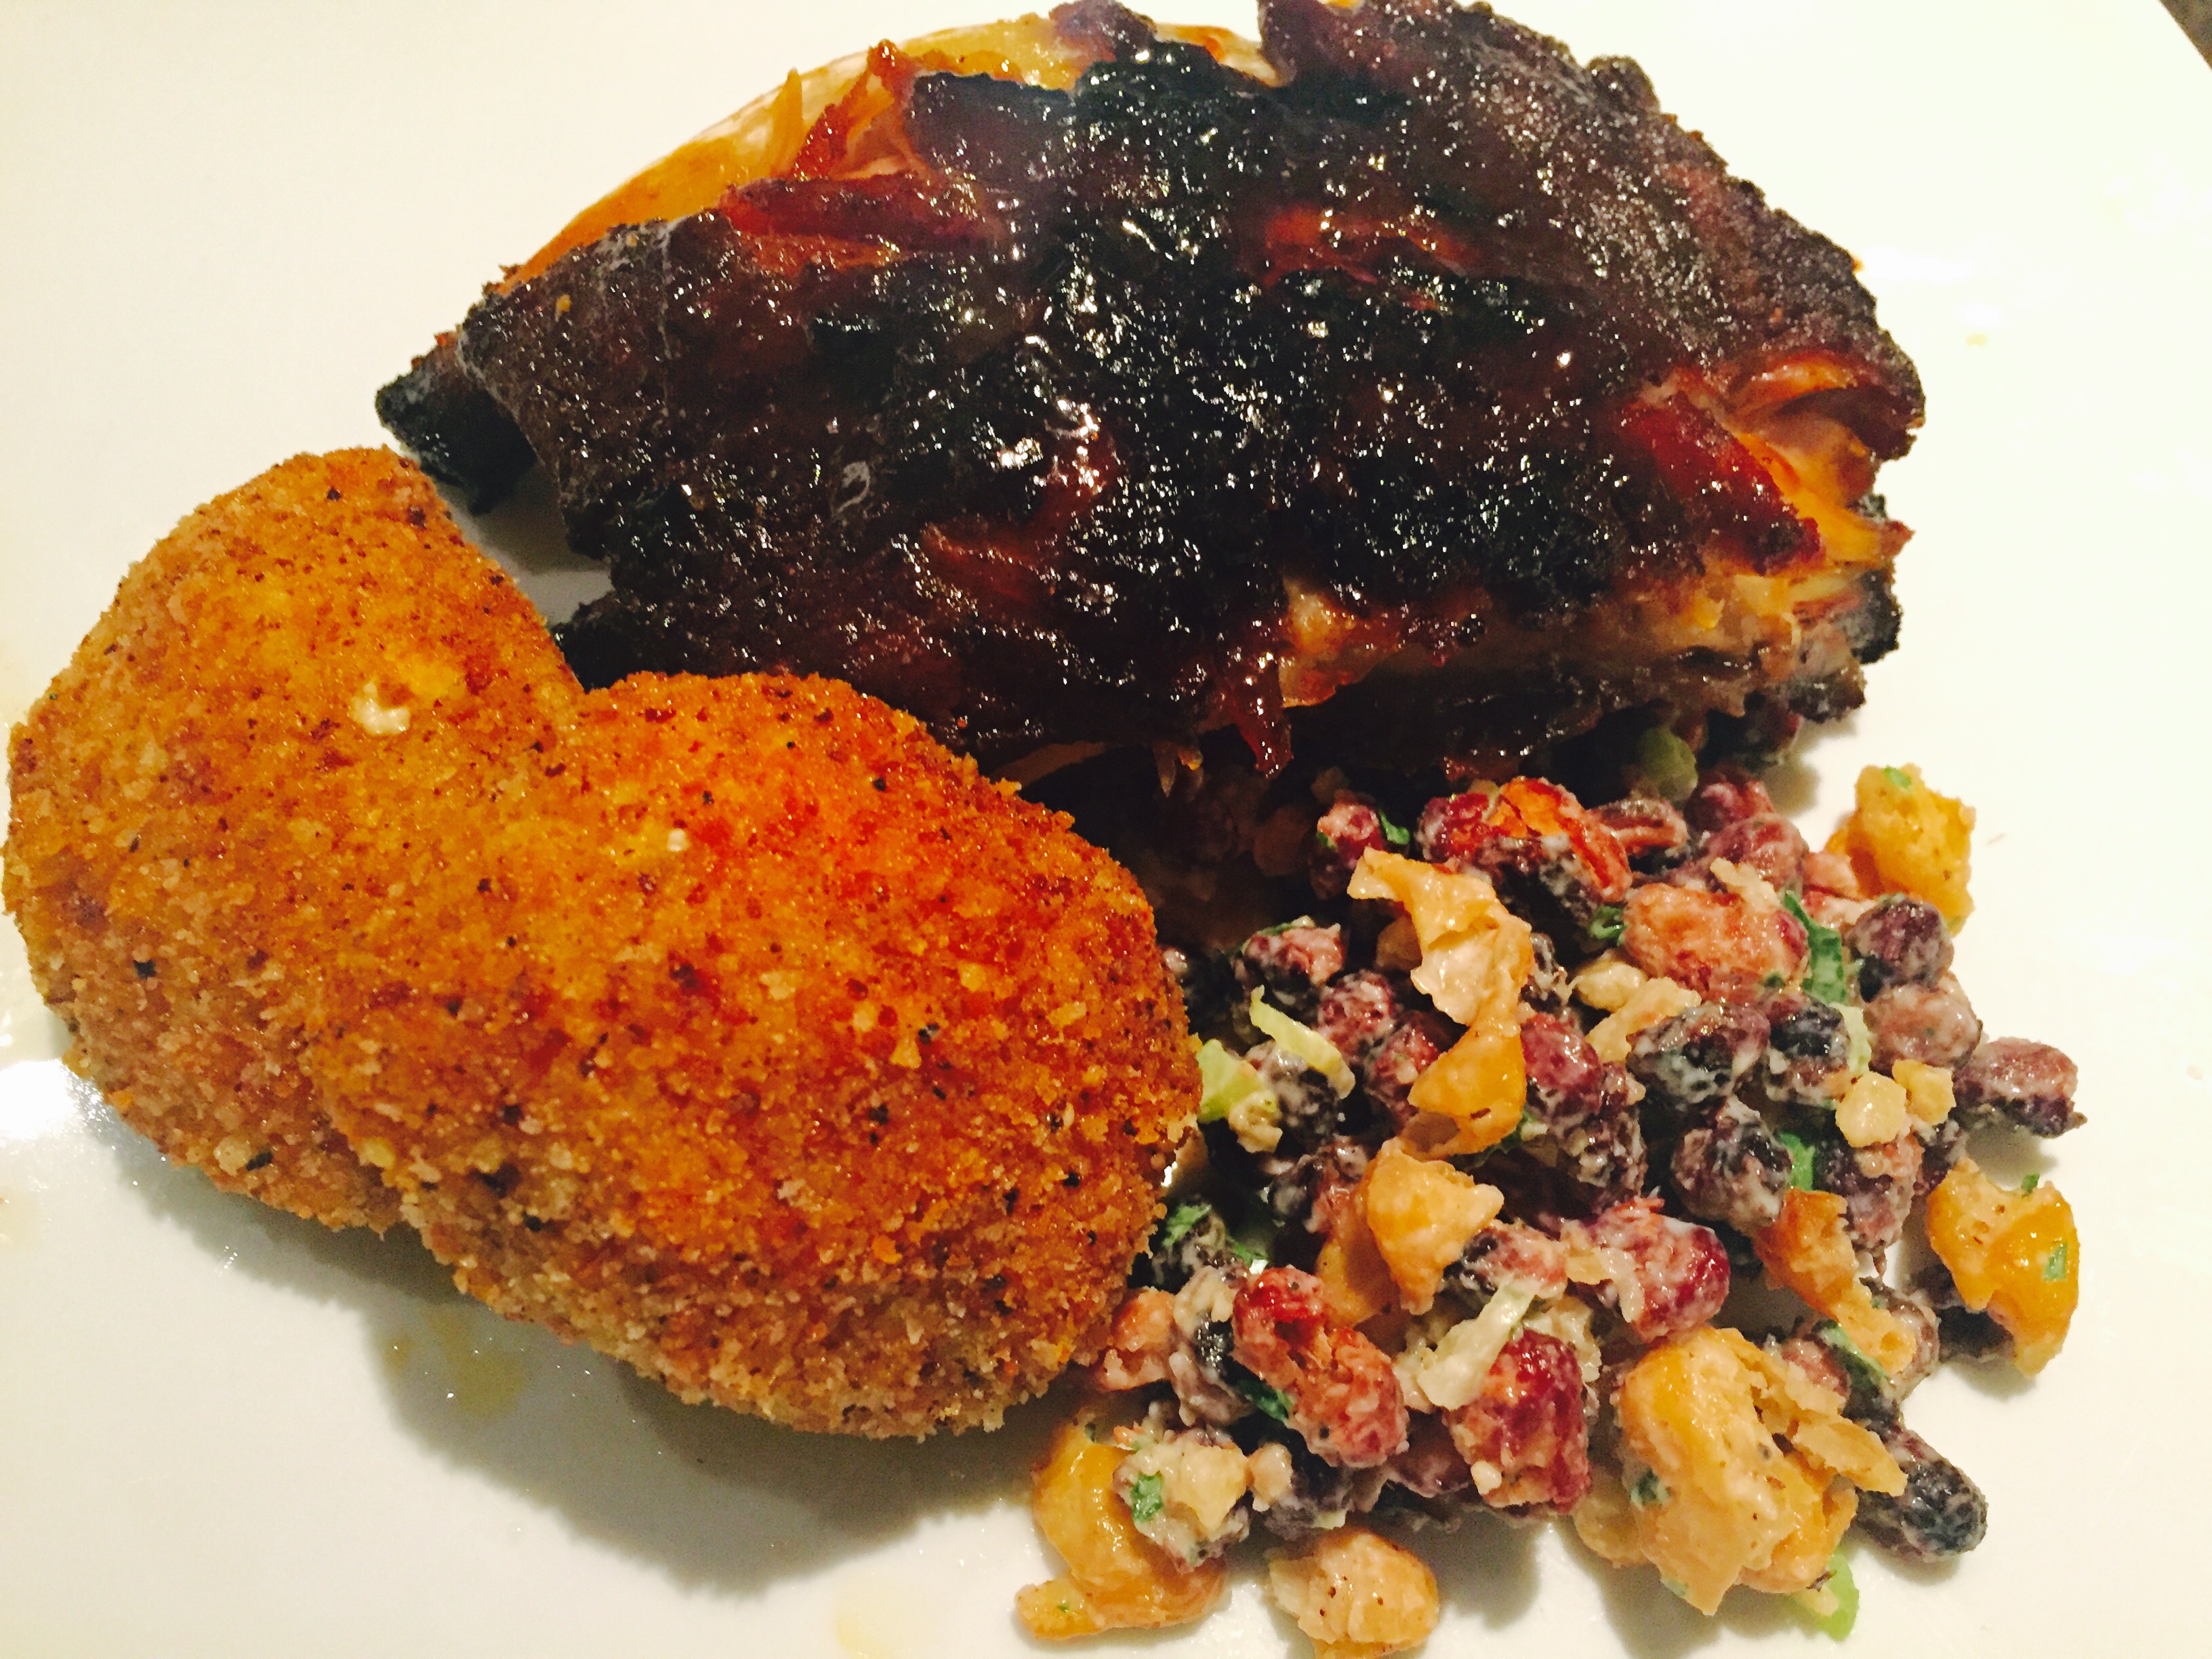 BBQ Baked Ribs with Deepfried Coxinhas and Roasted Bean Salad